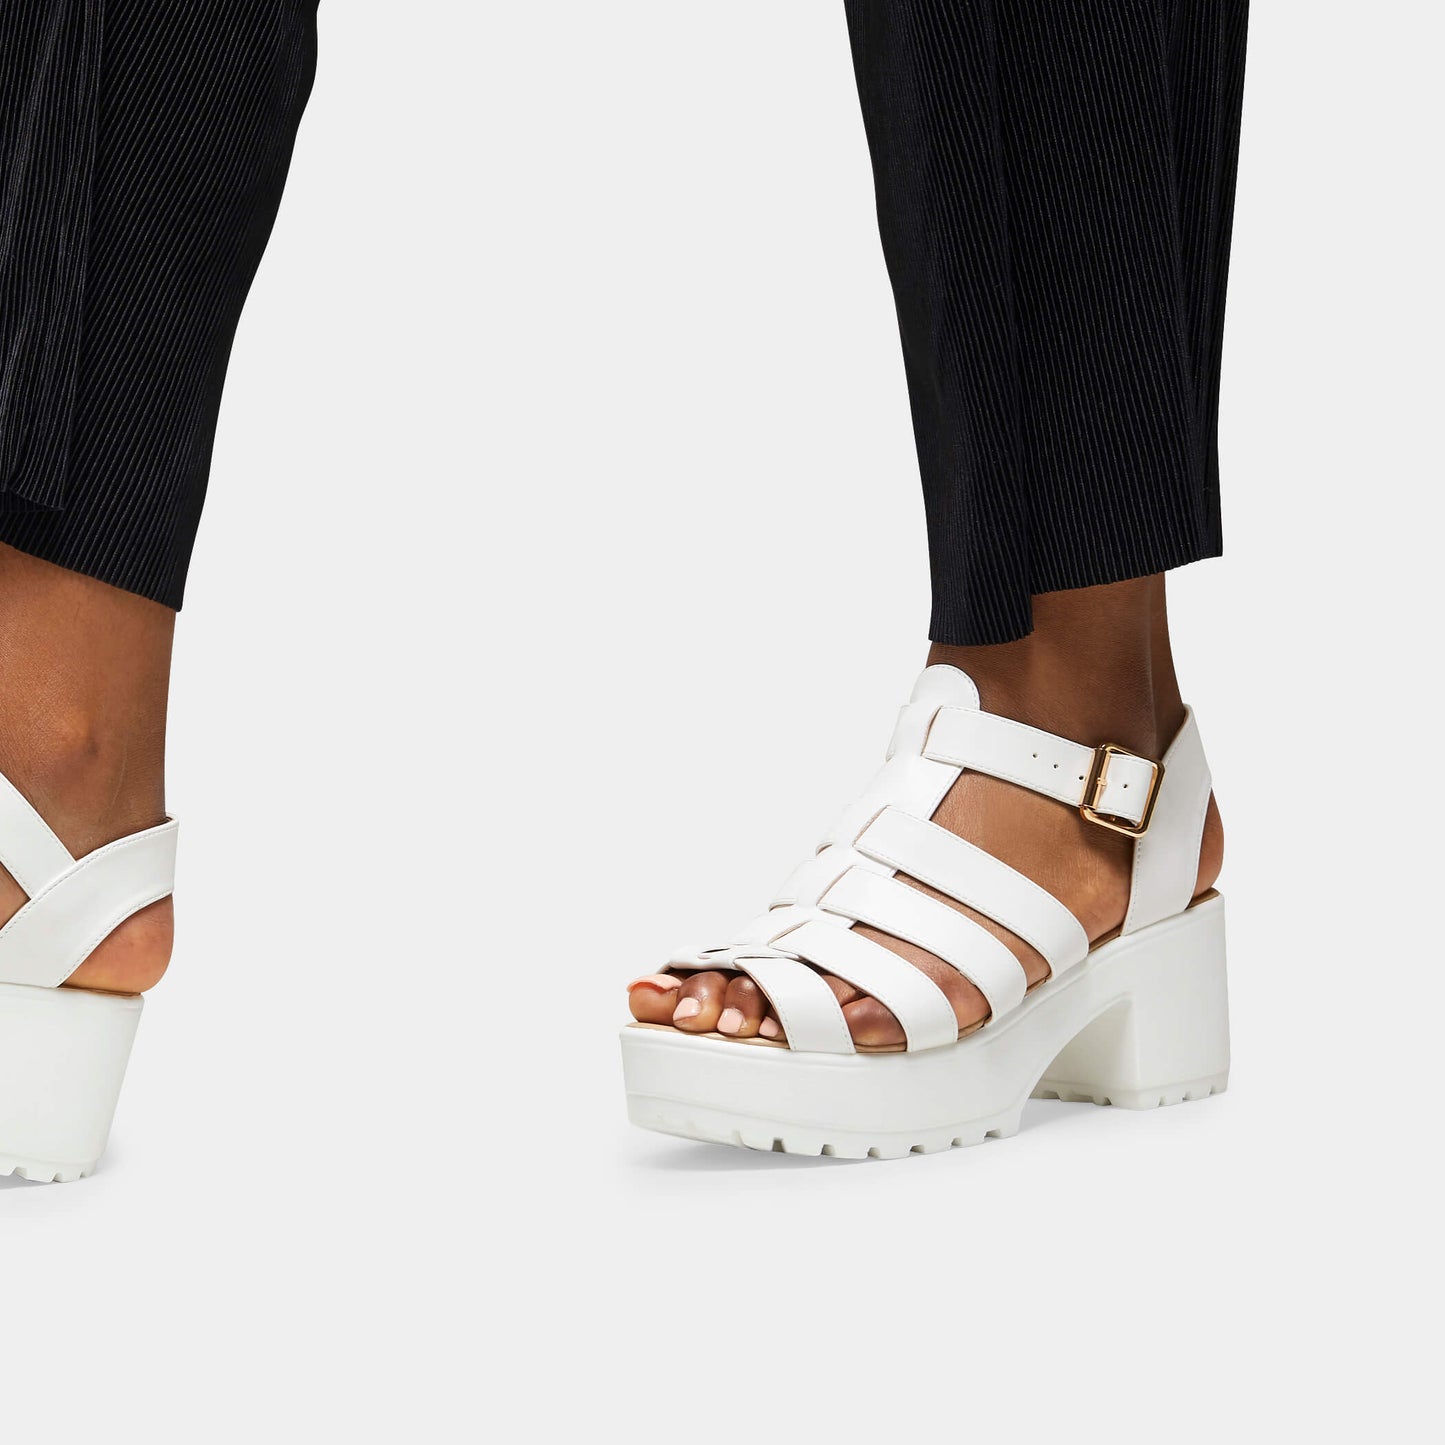 SII White Strappy Cleated Sandals - Sandals - KOI Footwear - White - Model Left View